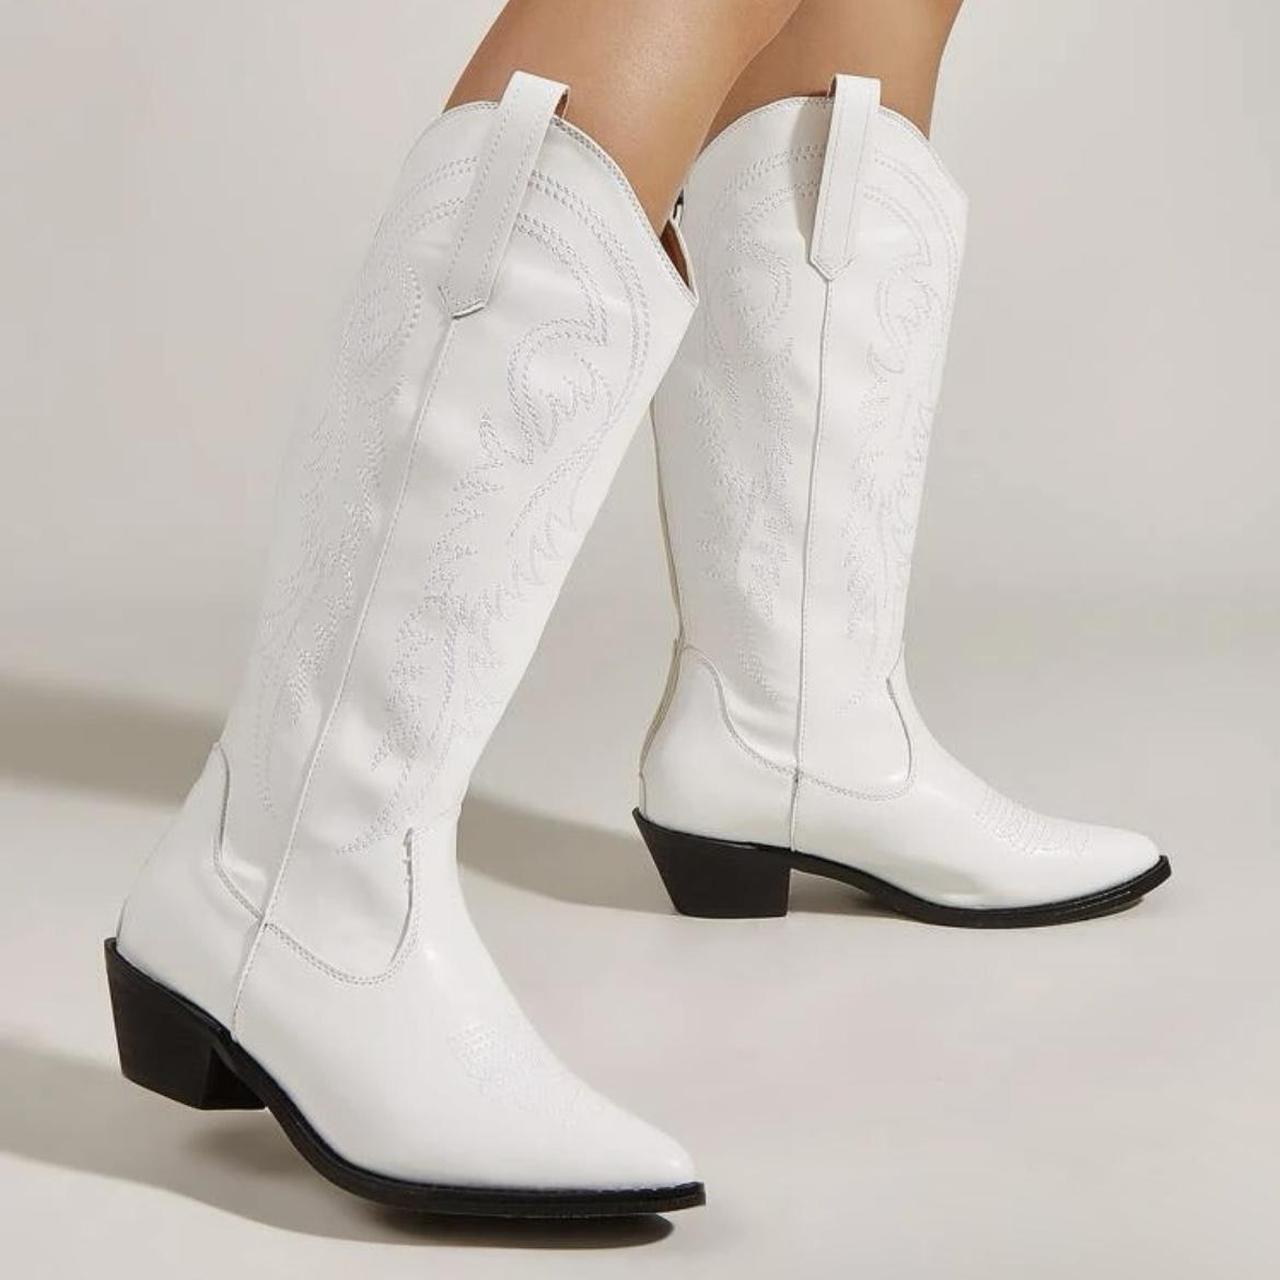 Women's White and Black Boots | Depop